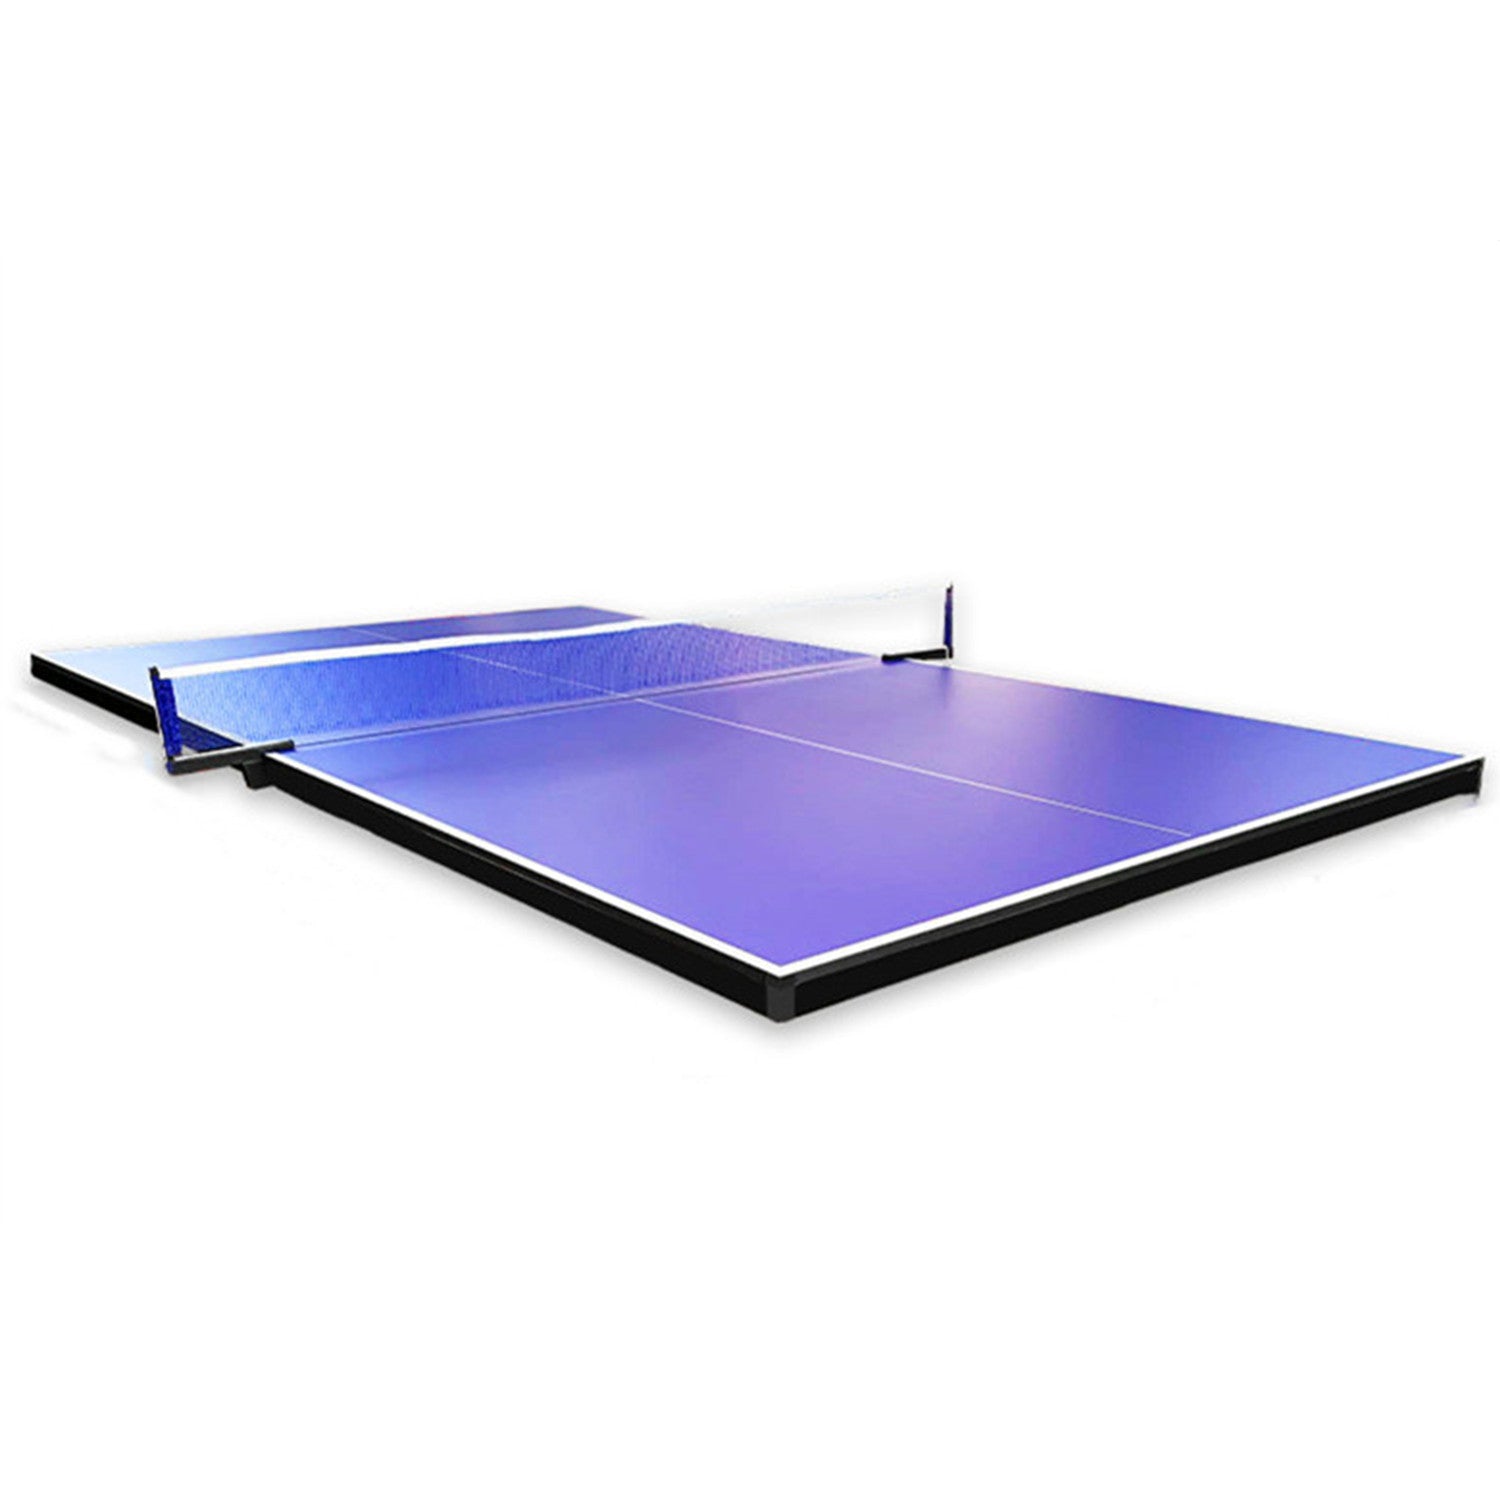 16mm Standard Ping Pong Table Tennis Top for Pool Billiard Table w Bats Balls